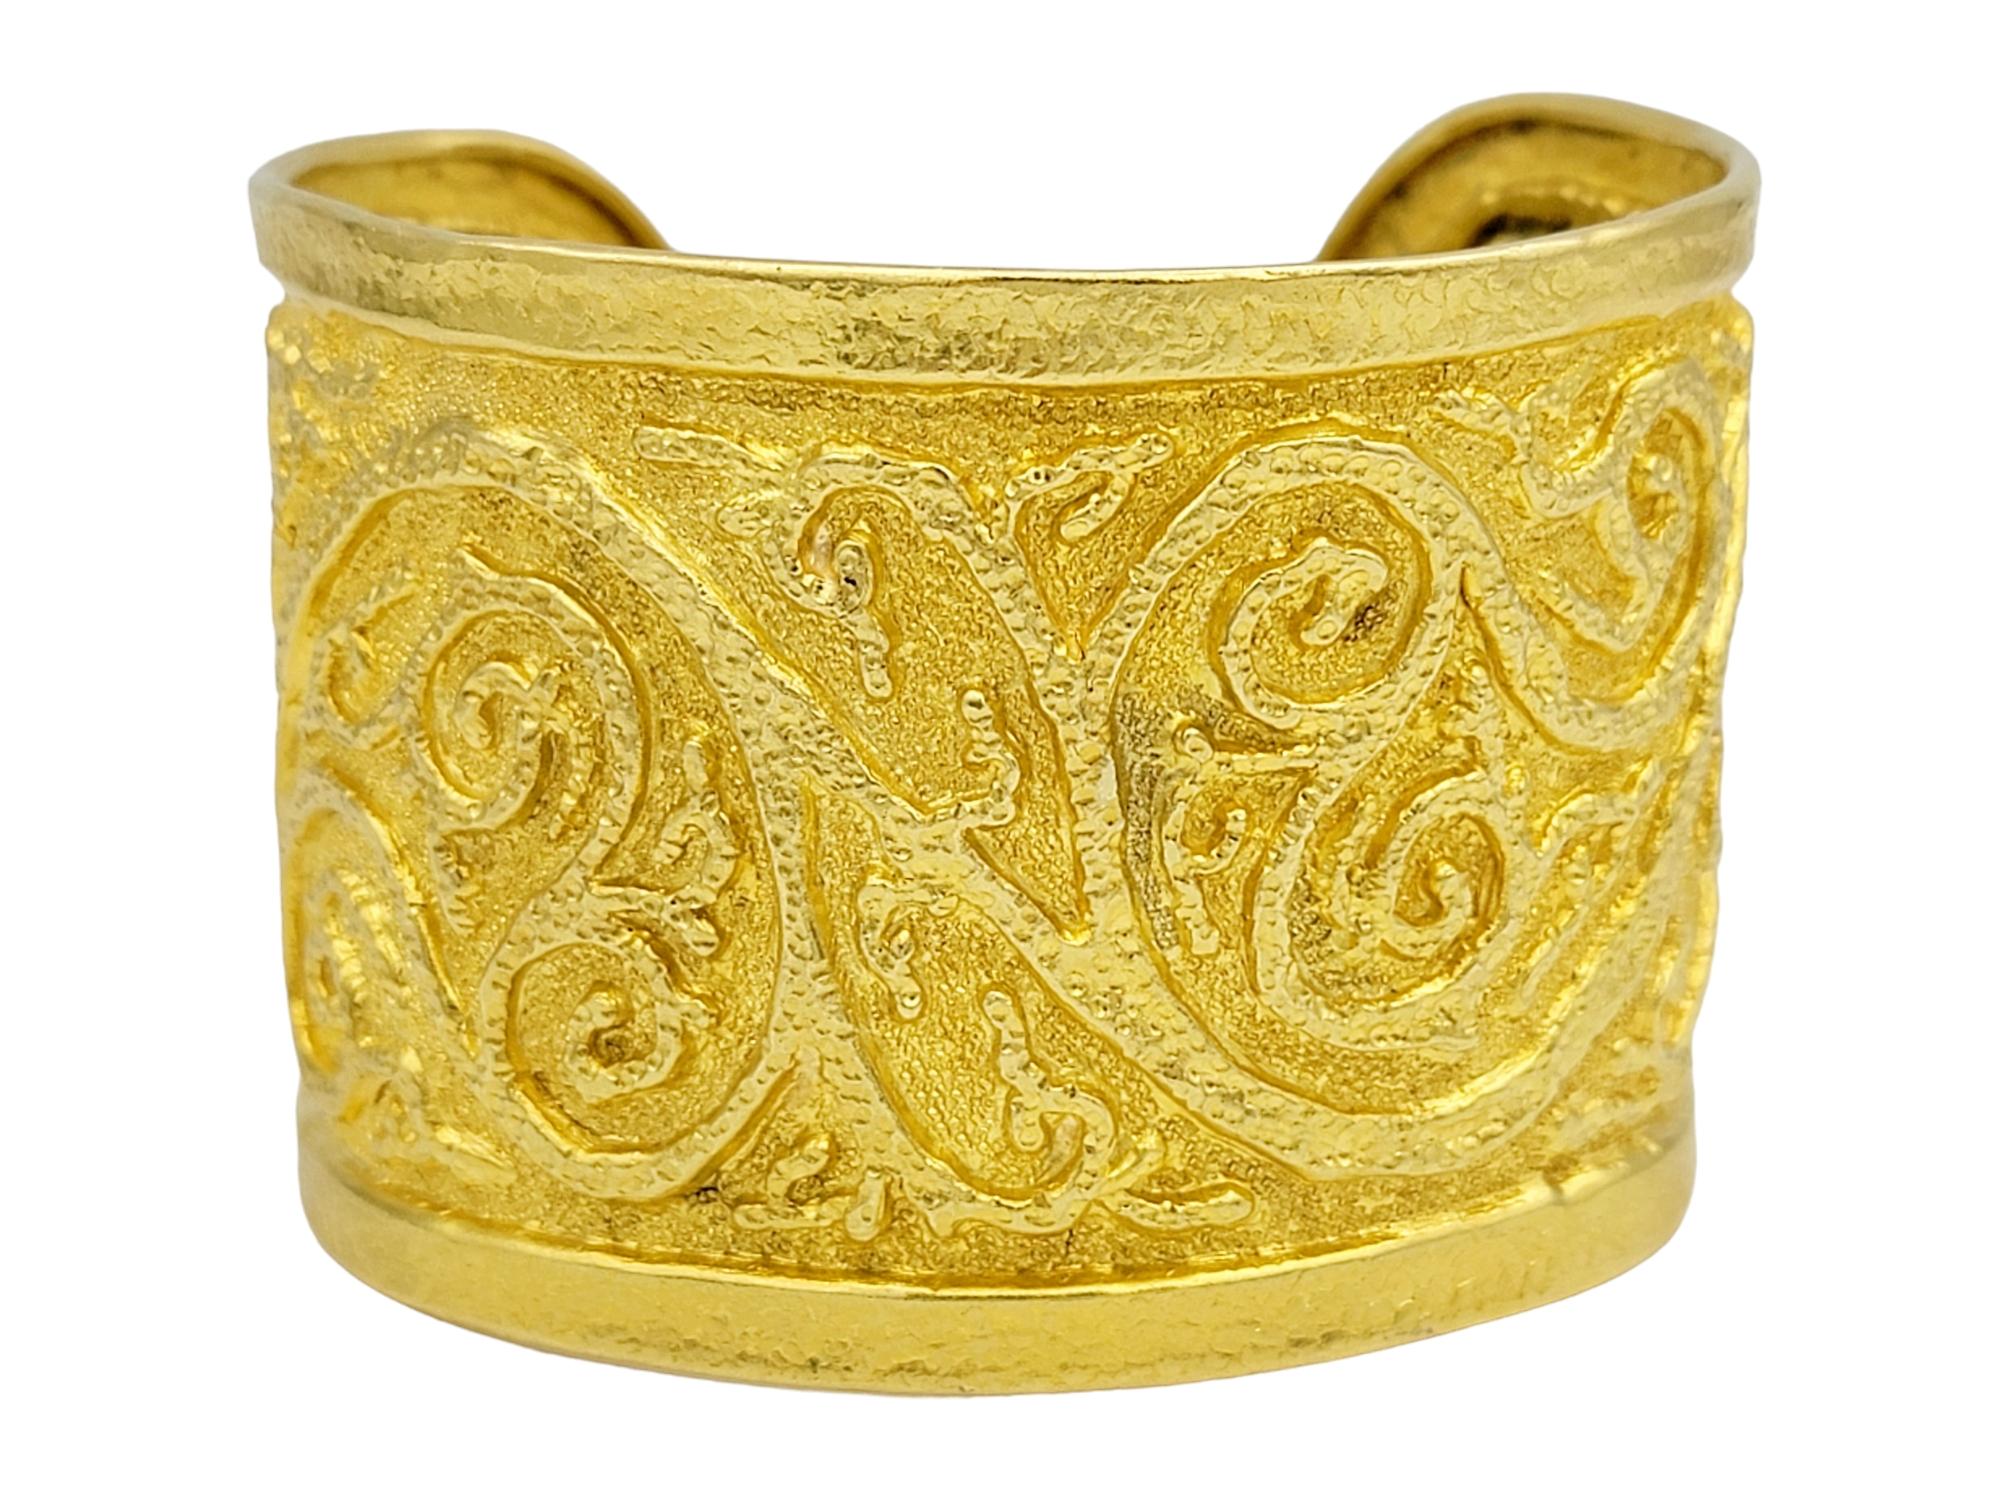 Contemporary 22 Karat Yellow Gold Wide Cuff Bracelet with Multi-Textured Scroll Design For Sale